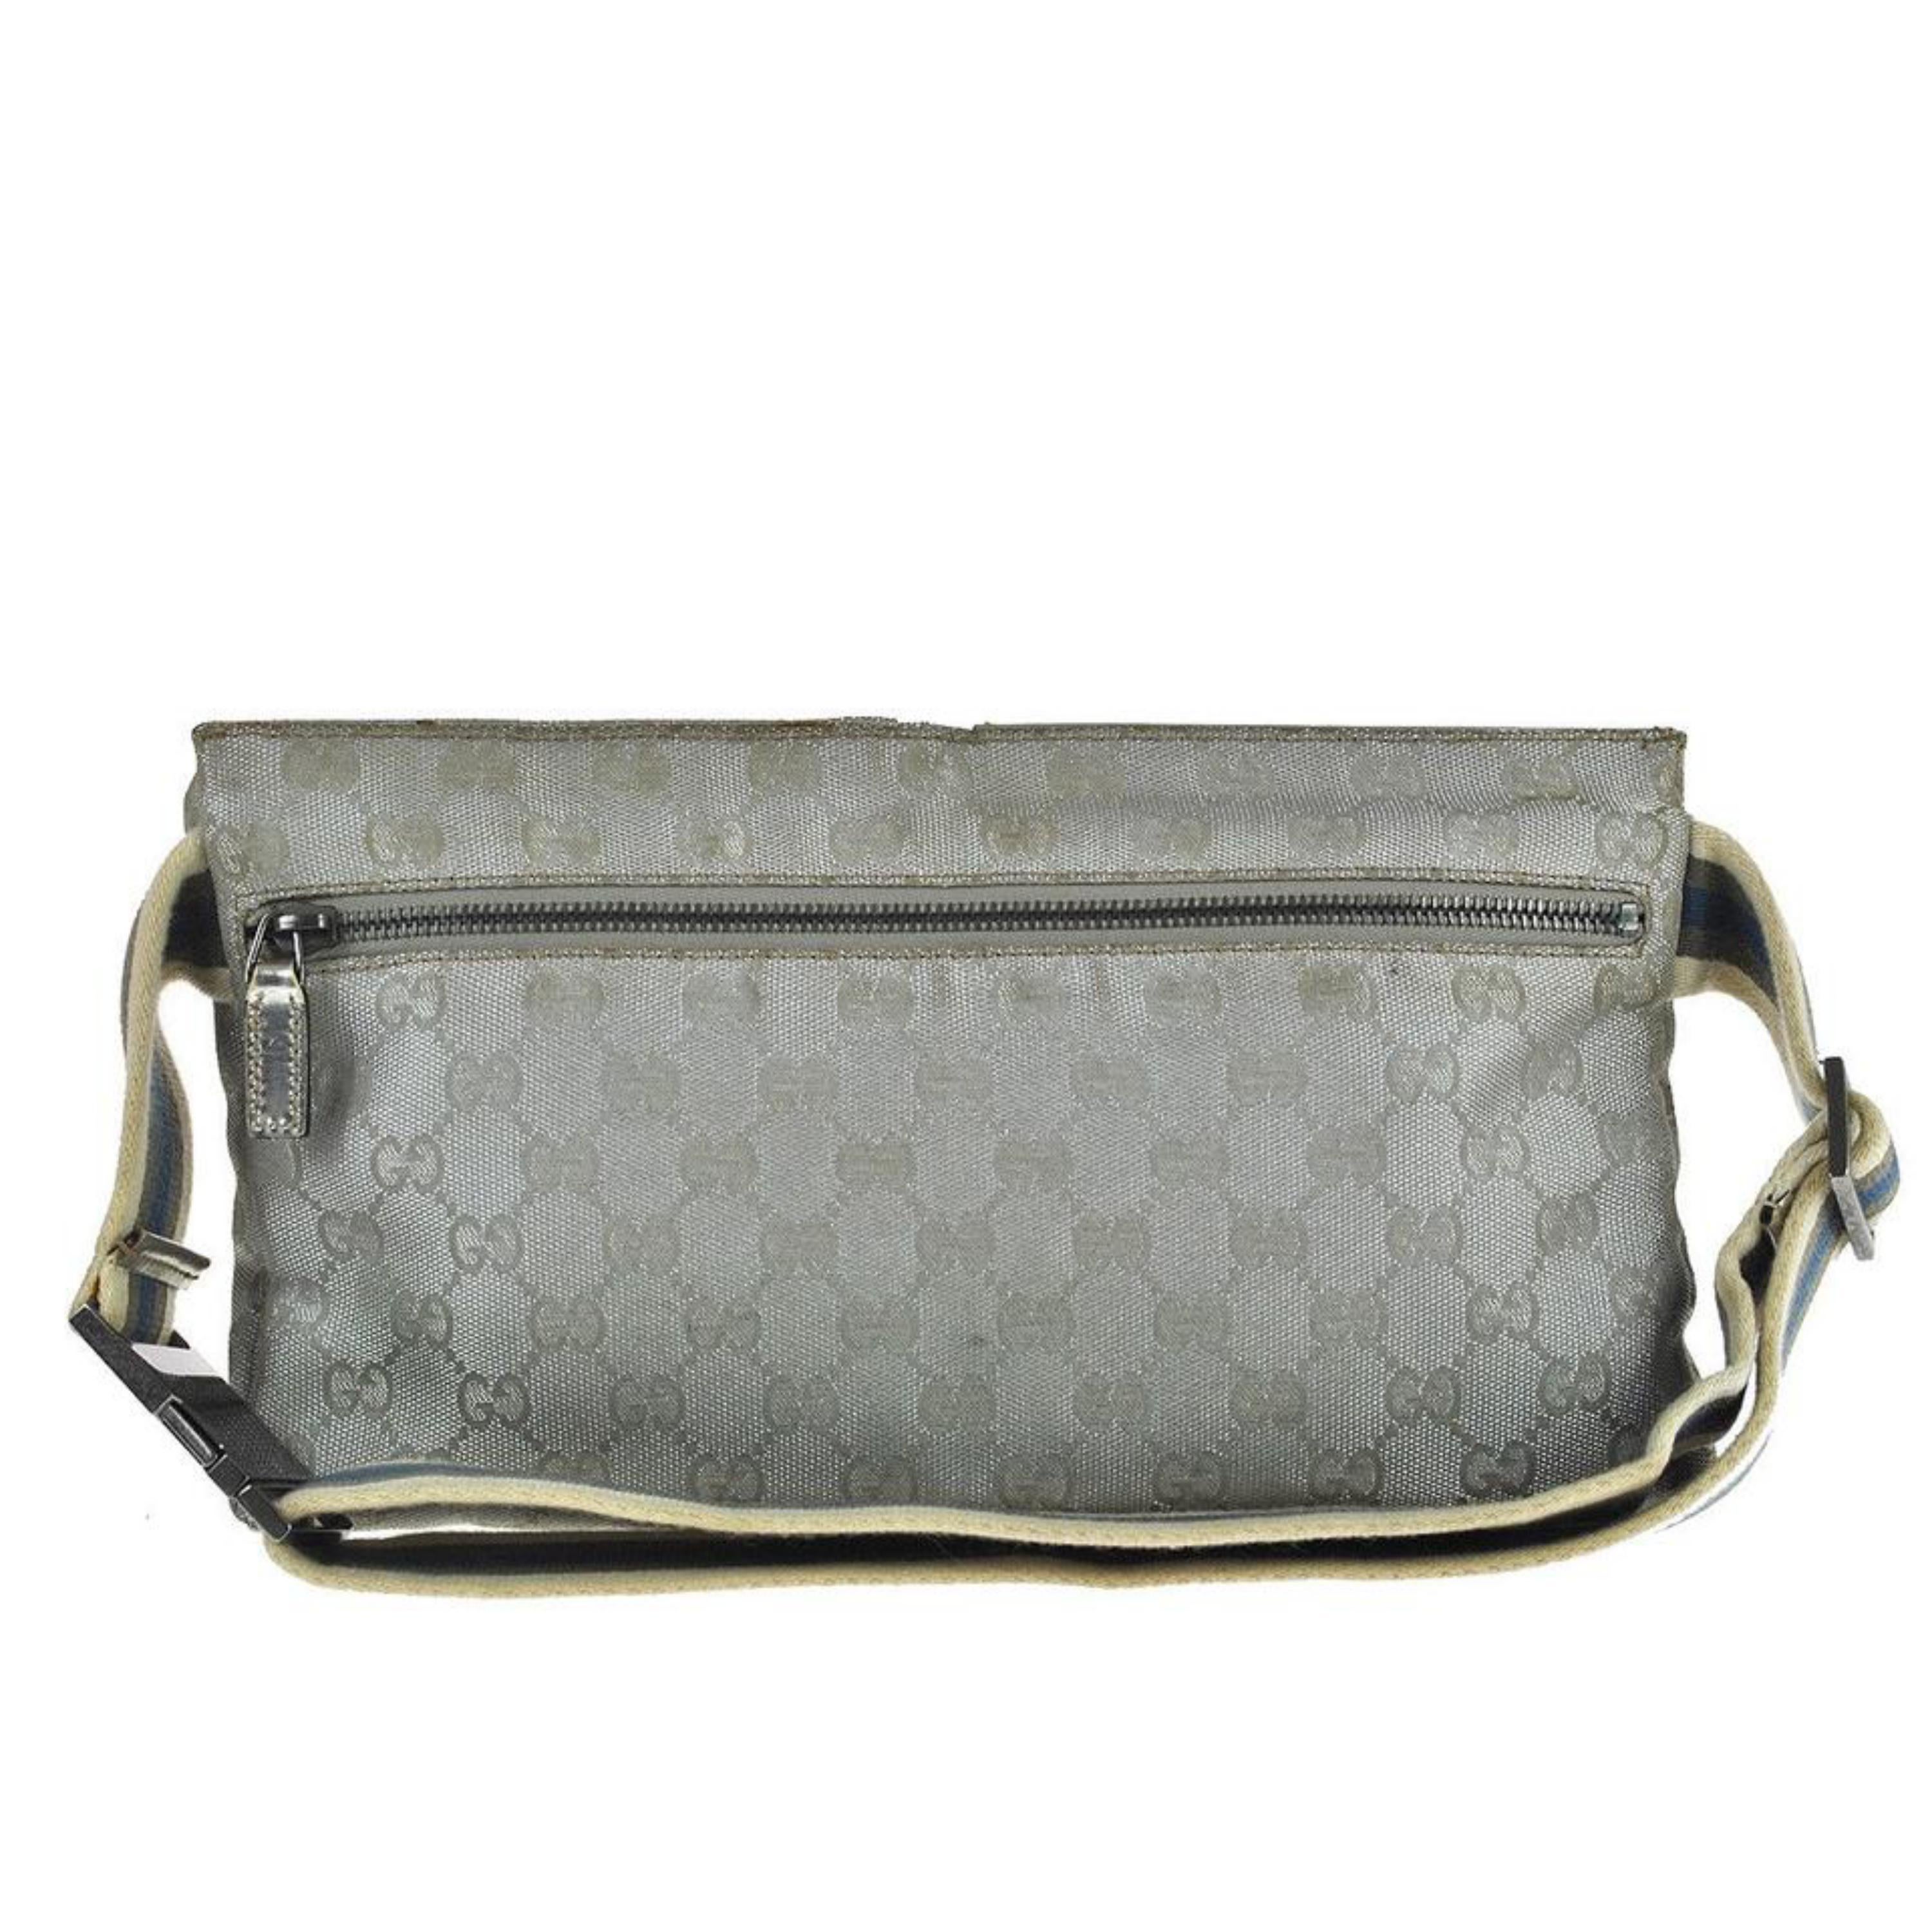 Gucci Monogram Fanny Pack Waist Pouch 868030 Silver Canvas Cross Body Bag For Sale 2